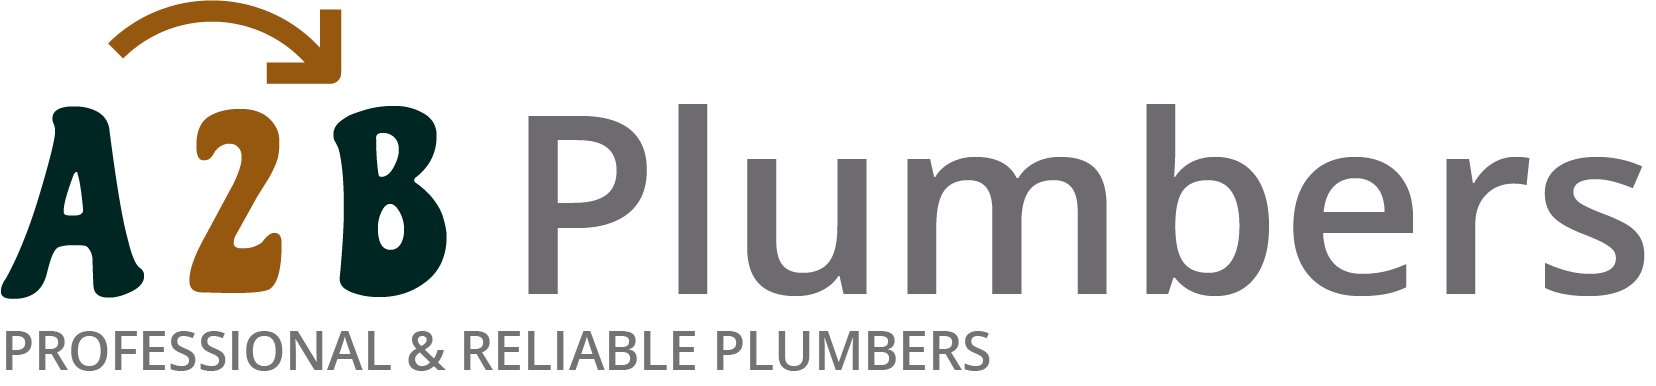 If you need a boiler installed, a radiator repaired or a leaking tap fixed, call us now - we provide services for properties in Louth and the local area.